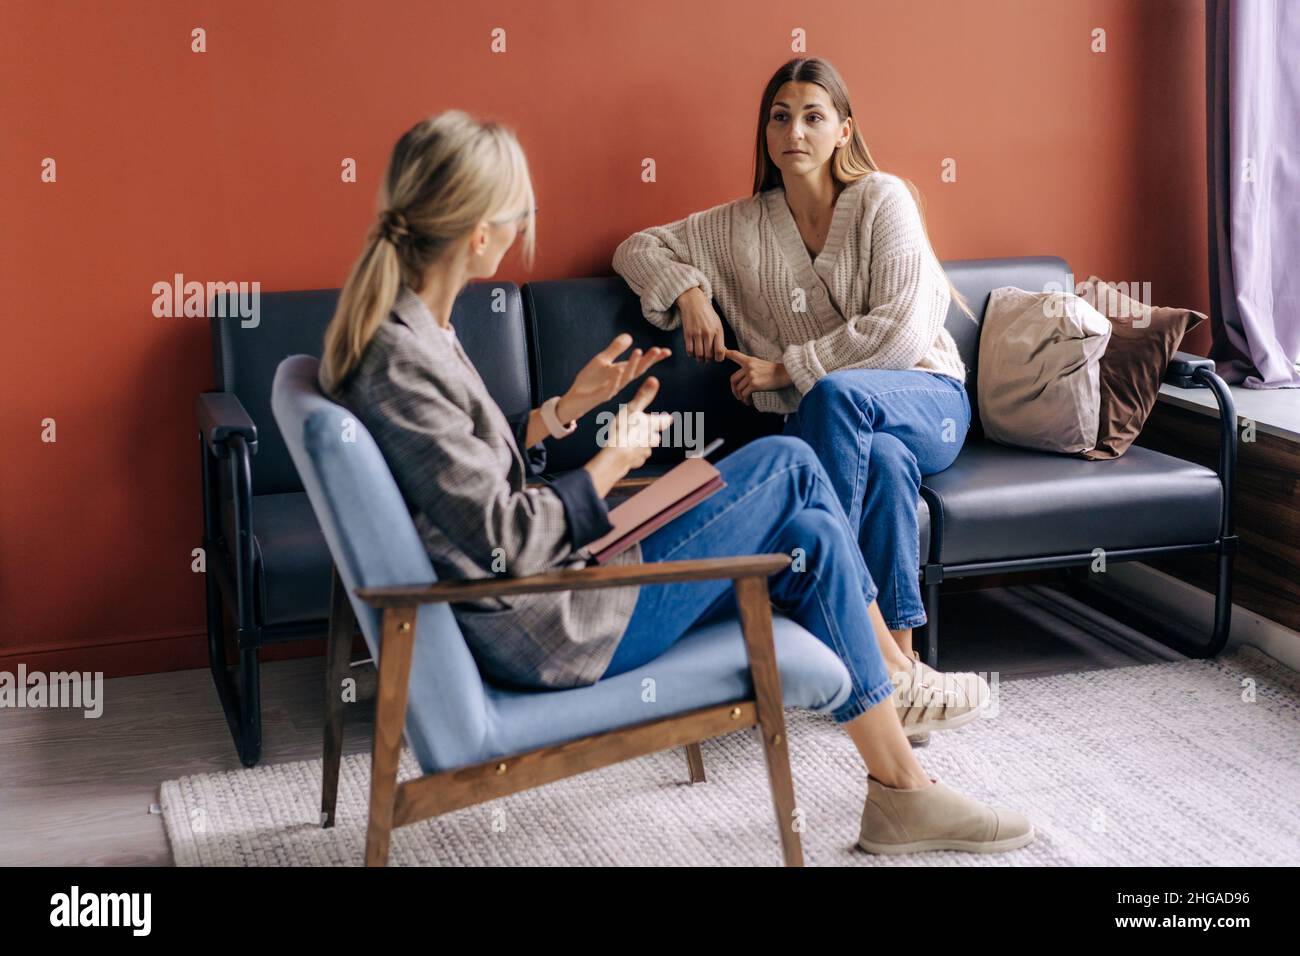 A female psychotherapist consults and gives advice and psychological support to a young woman. Stock Photo